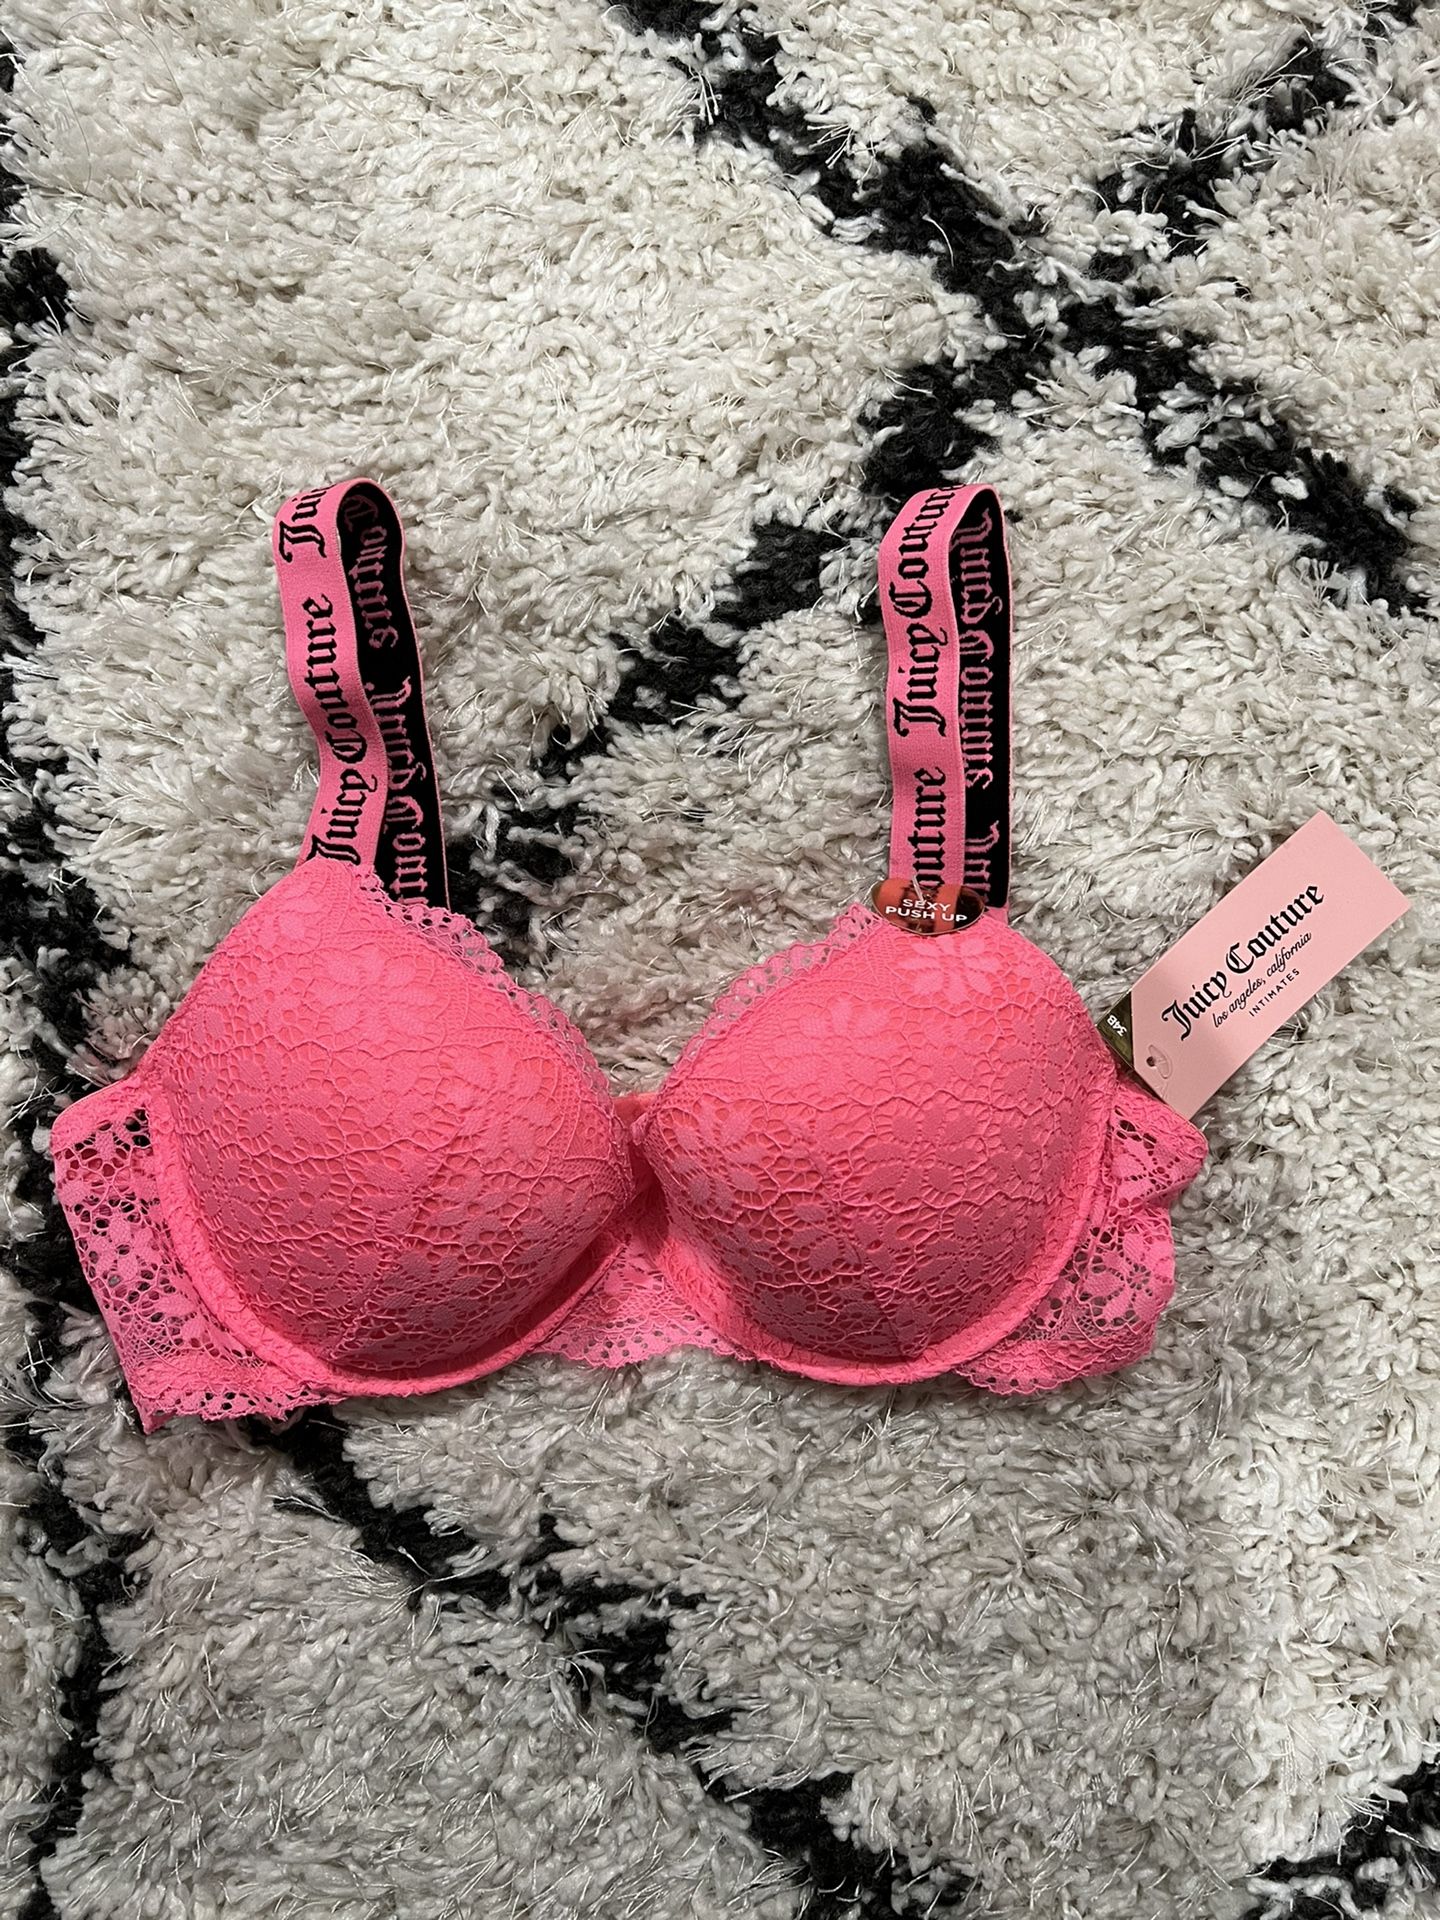 Juicy Couture Push Up Neon Pink Lace Bra 34B for Sale in Fairfax